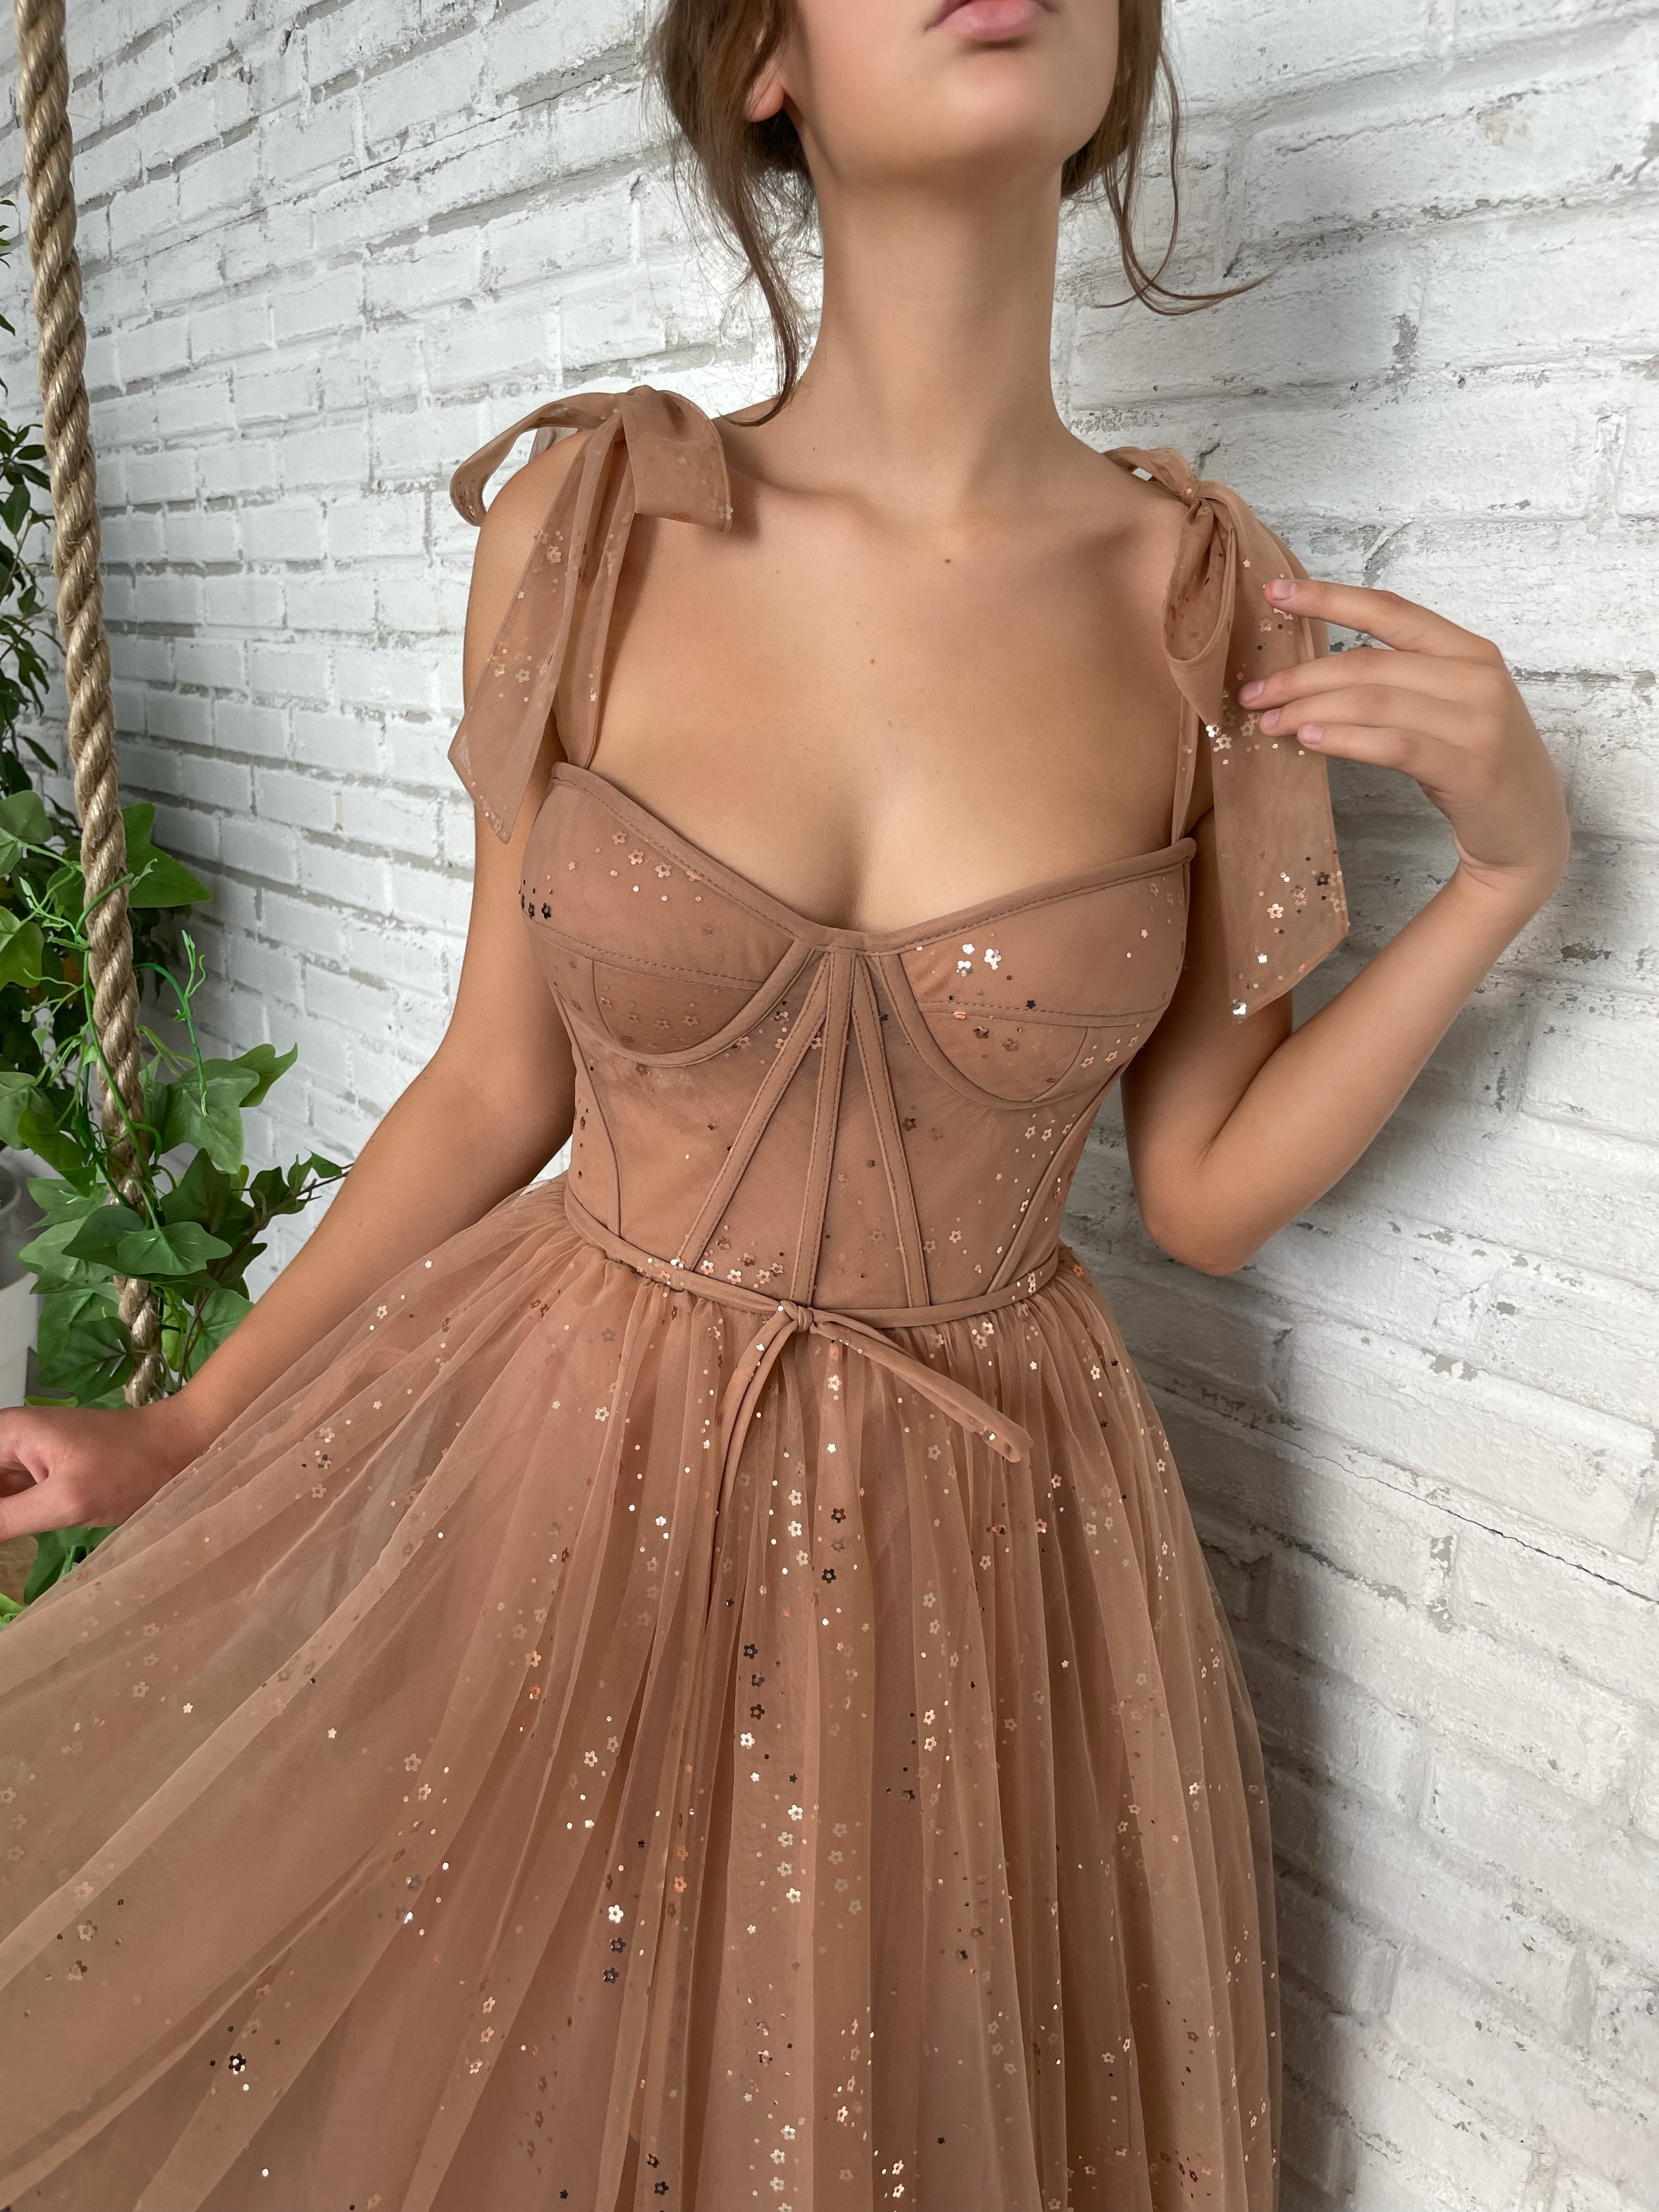 Brown midi dress with bow straps and starry fabric